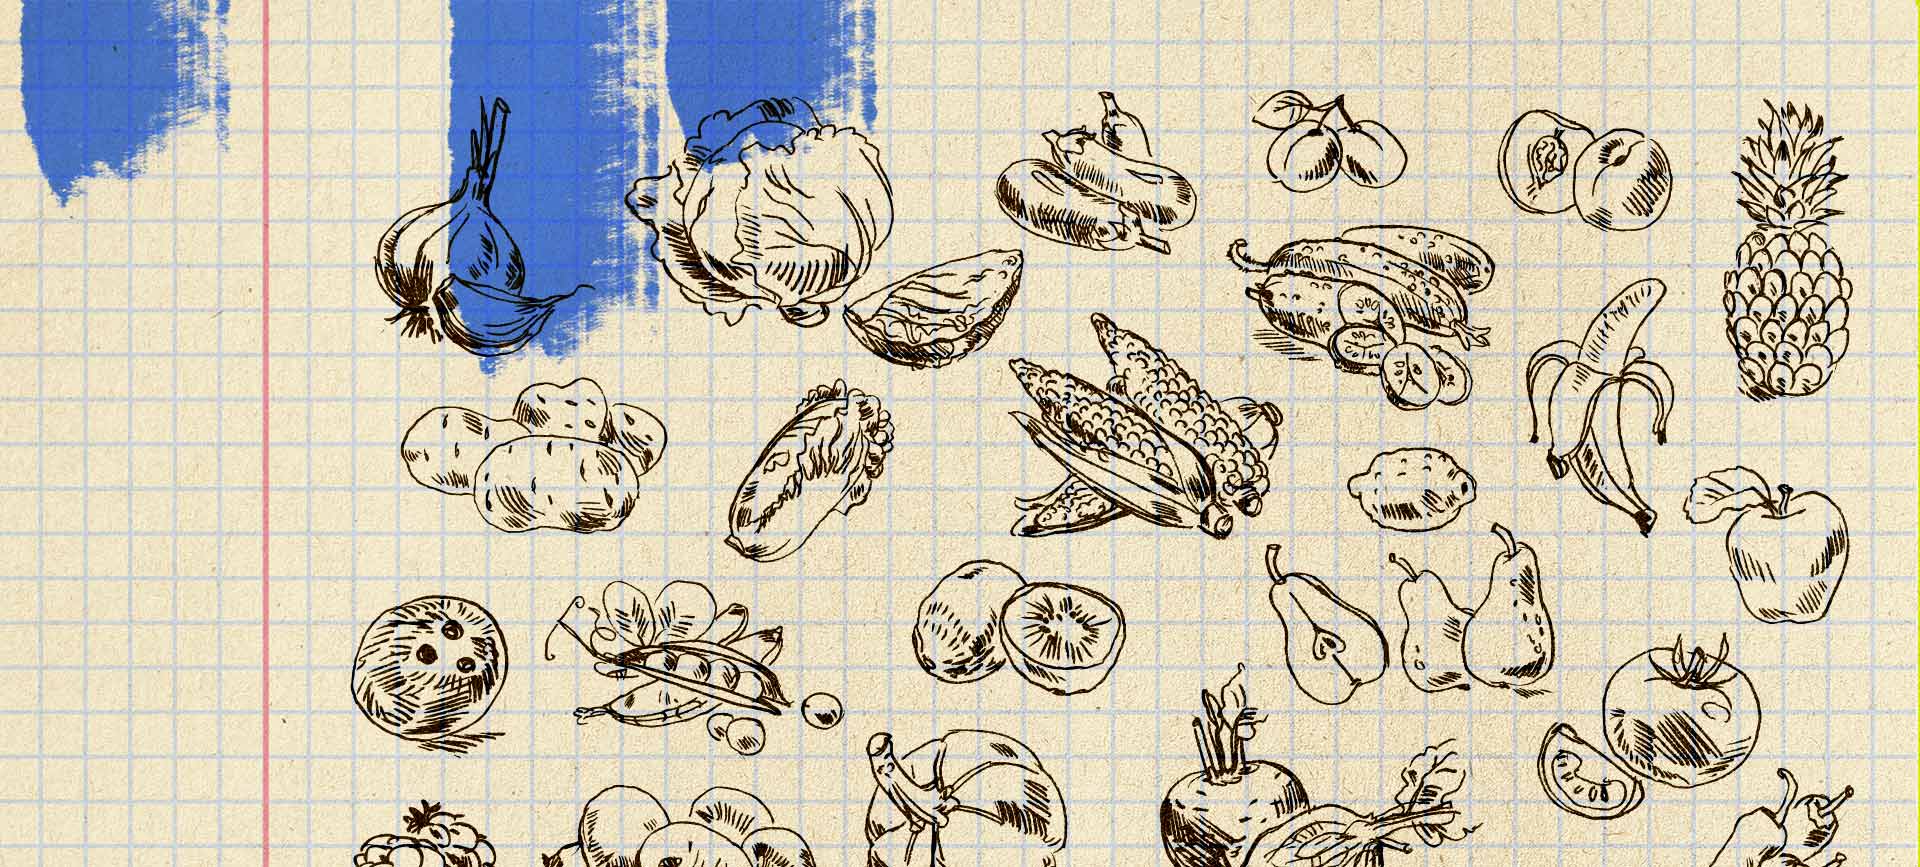 Different foods that are good for those with PCOS are sketched on a grid paper.